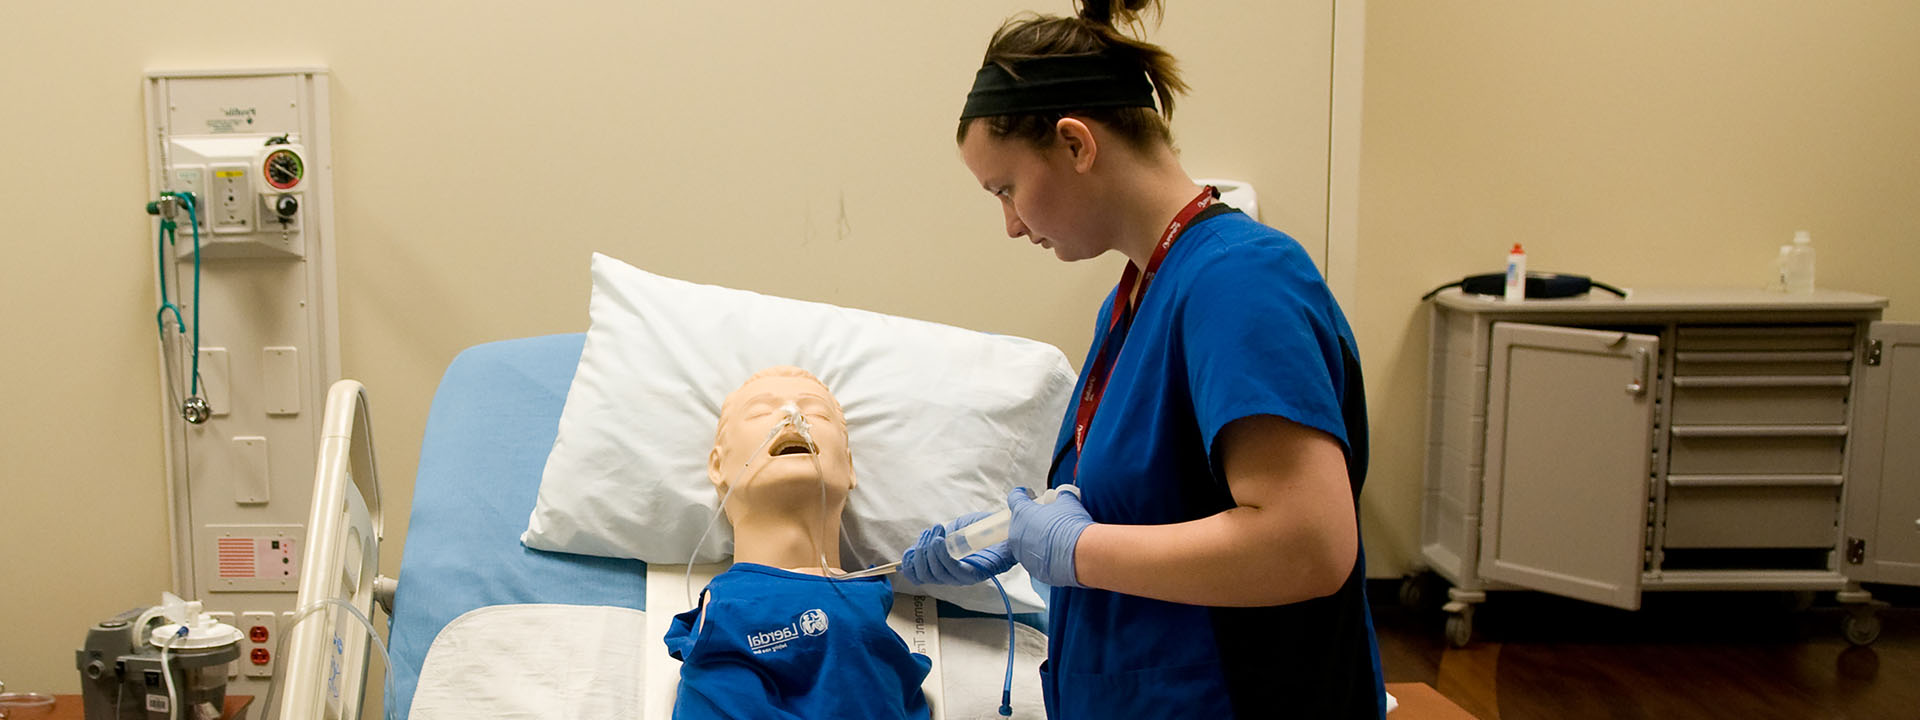 Student providing fluid to a mannequin